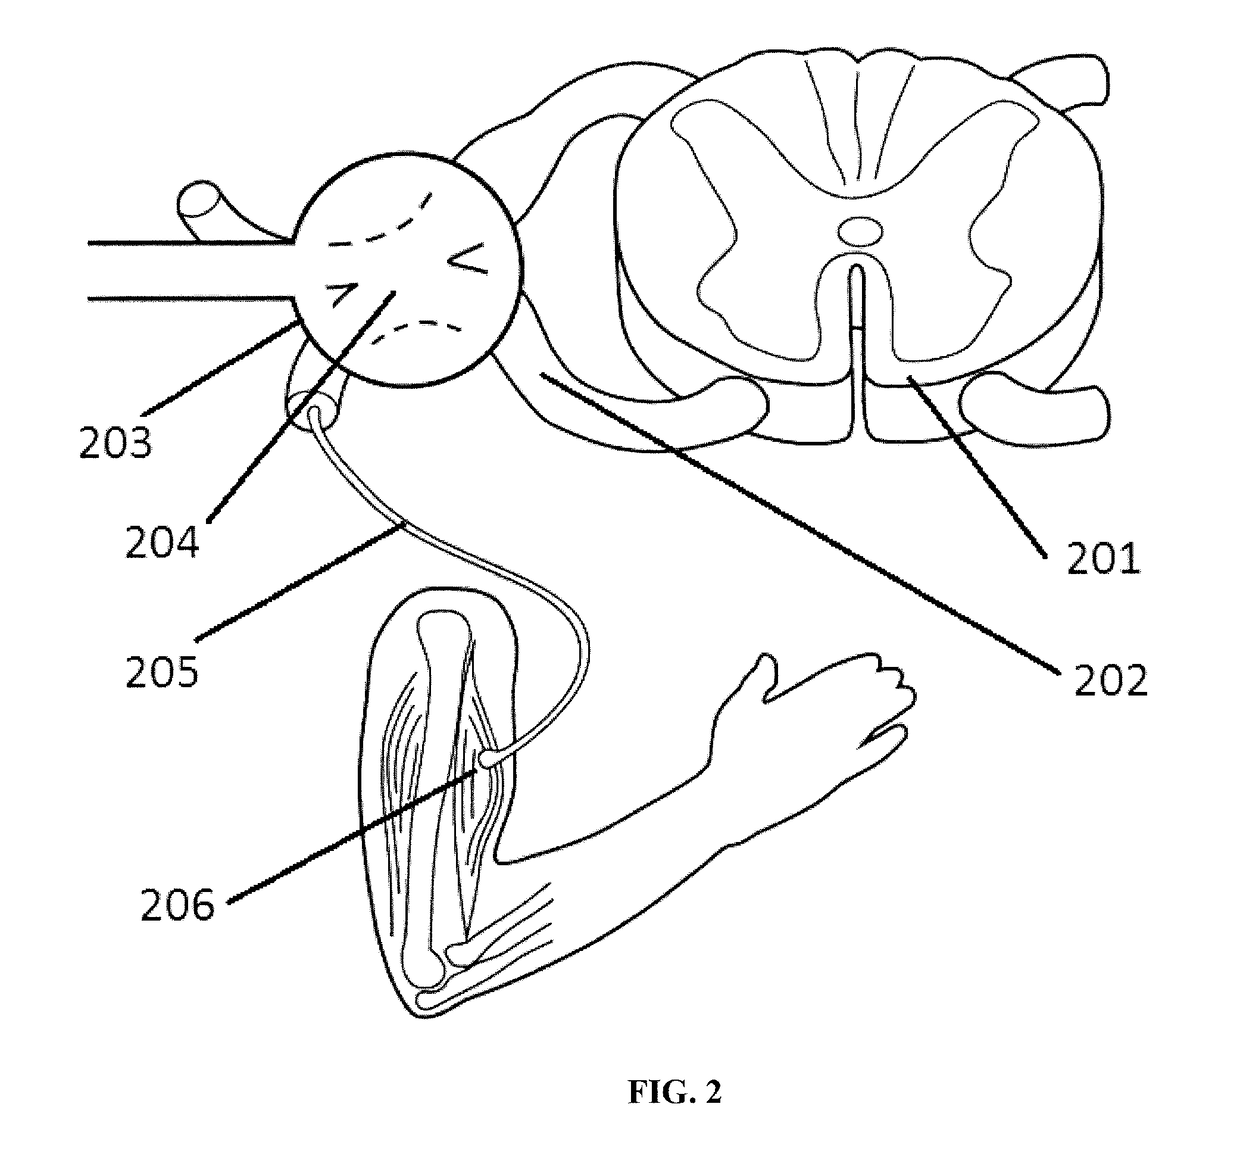 Systems and methods for pain treatment using spinal nerve magnetic stimulation